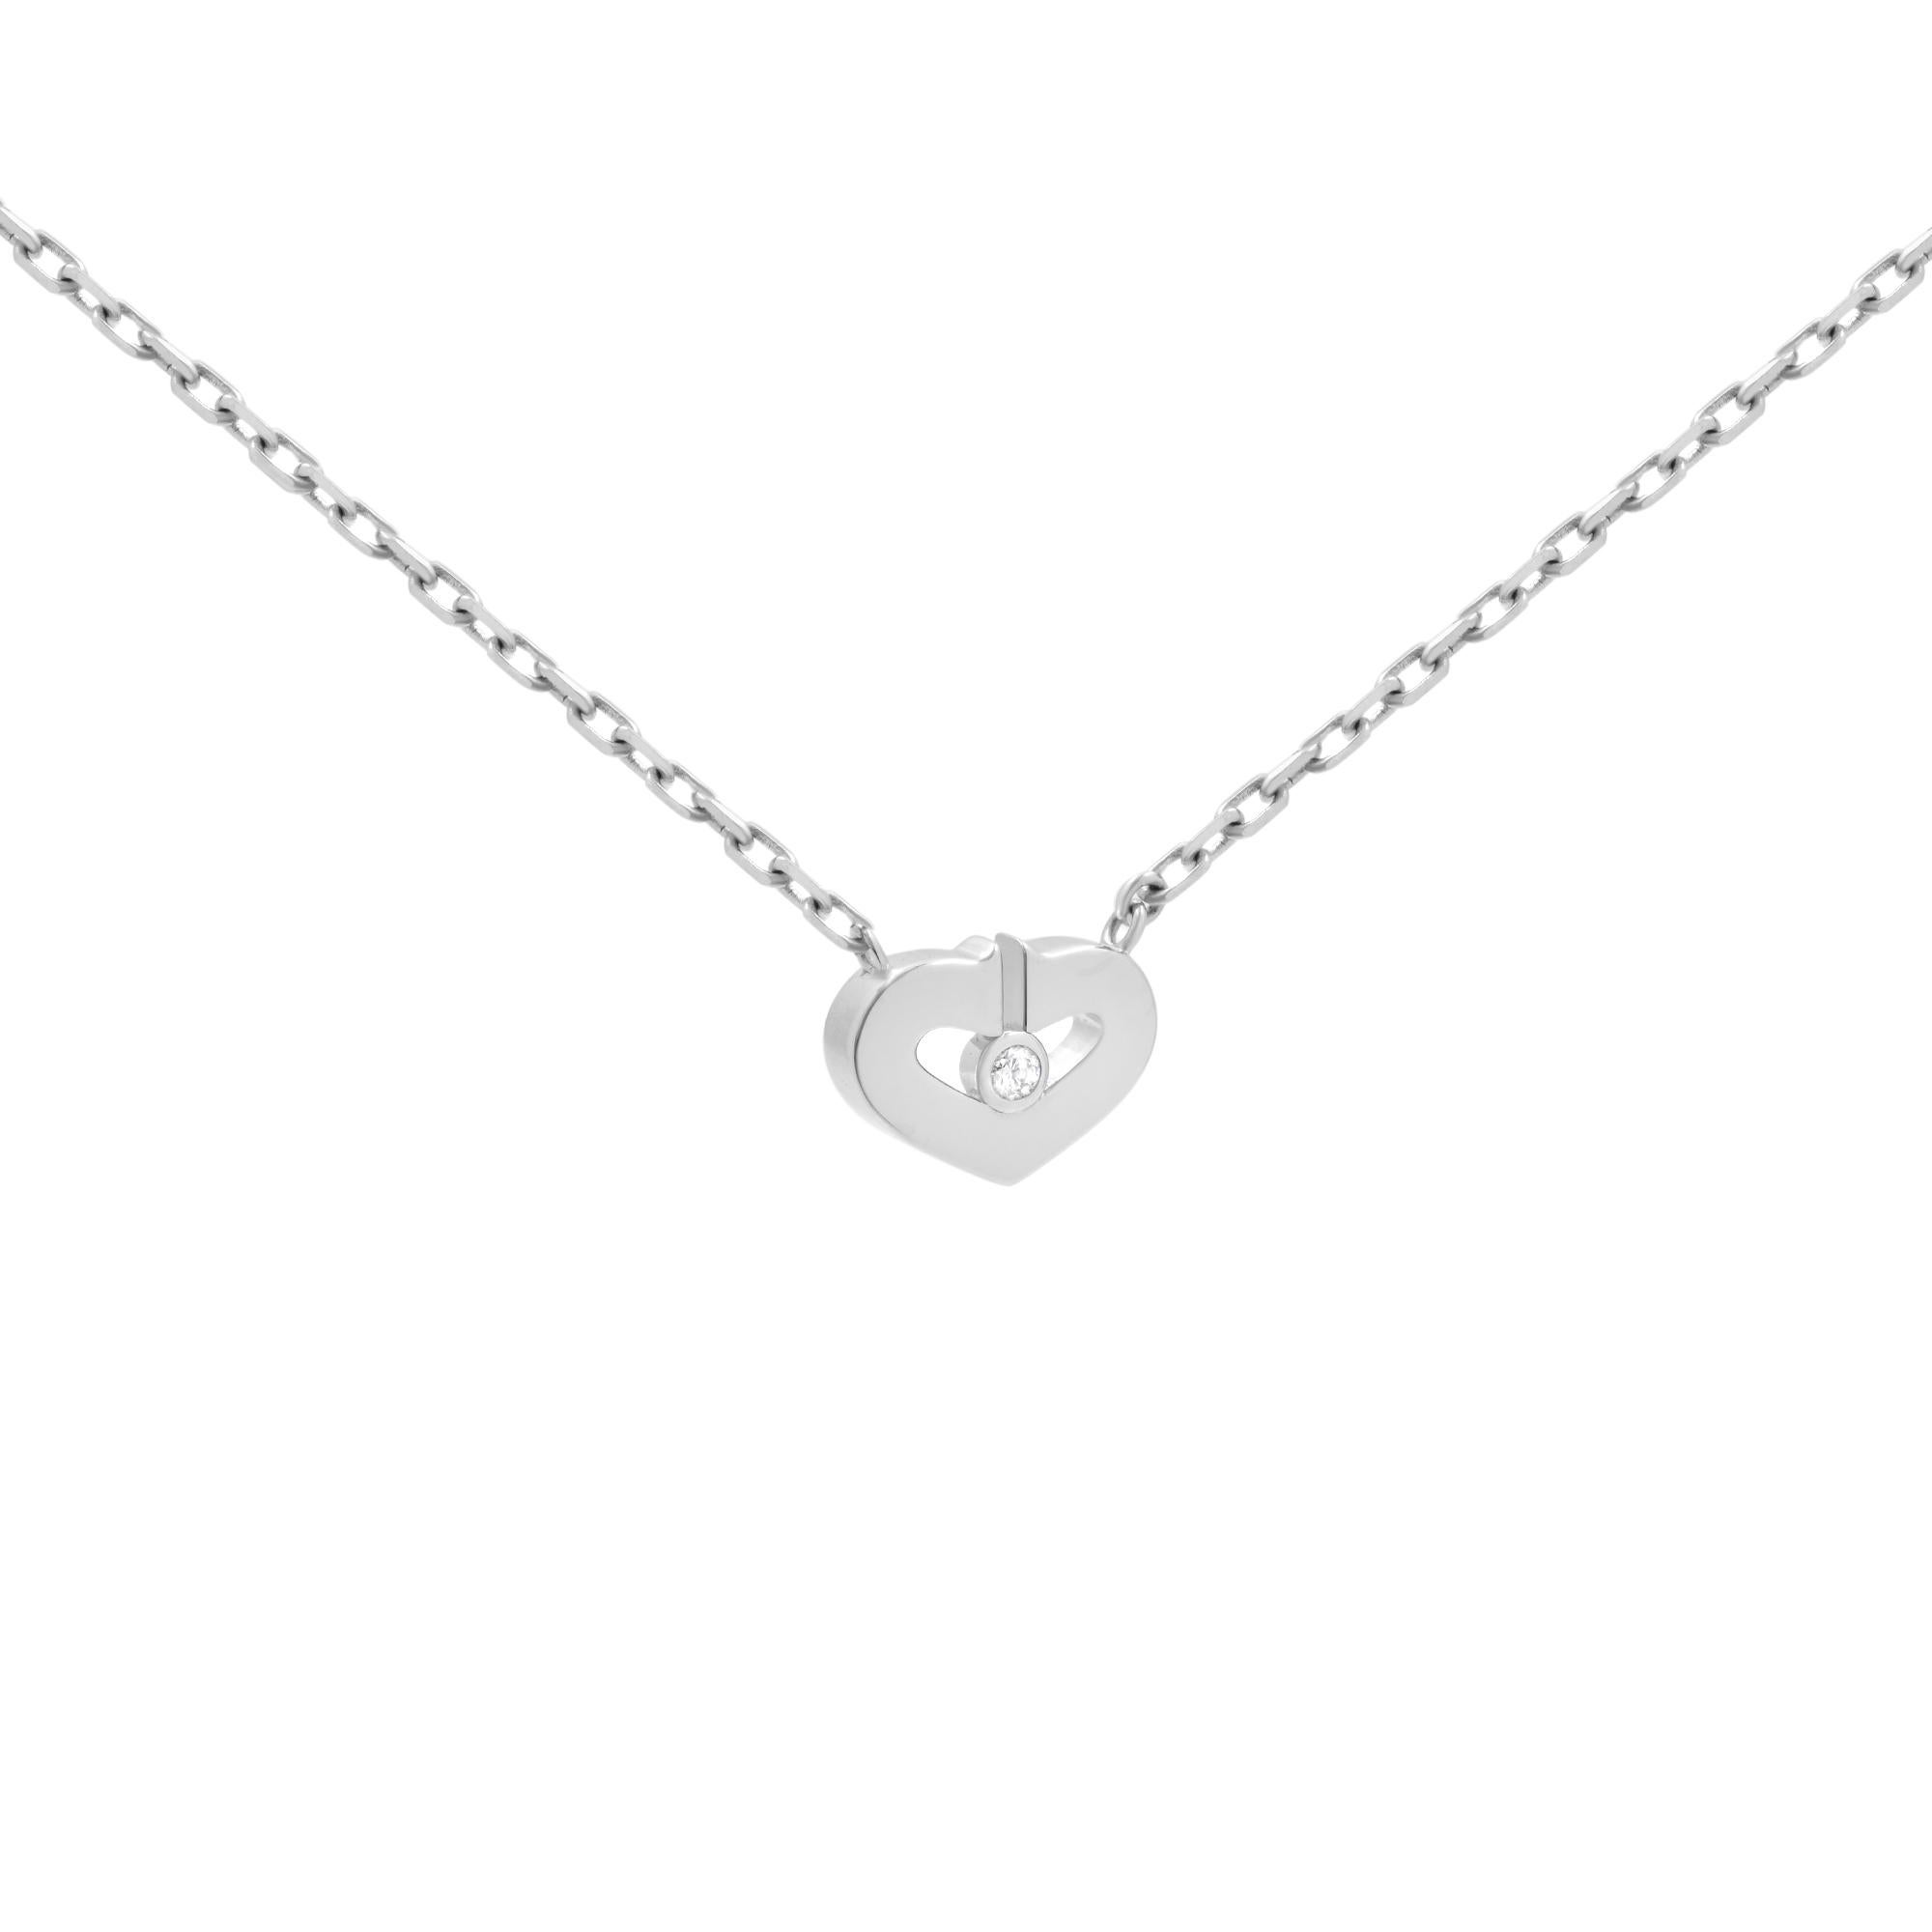 Cartier Heart C necklace in 18K white gold. This alluring piece features a C heart that opens at the top and is adorned with a dazzling diamond at the center. Diamond size: 0.02cttw. Chain length: 16 inches. Excellent pre-owned condition. Original